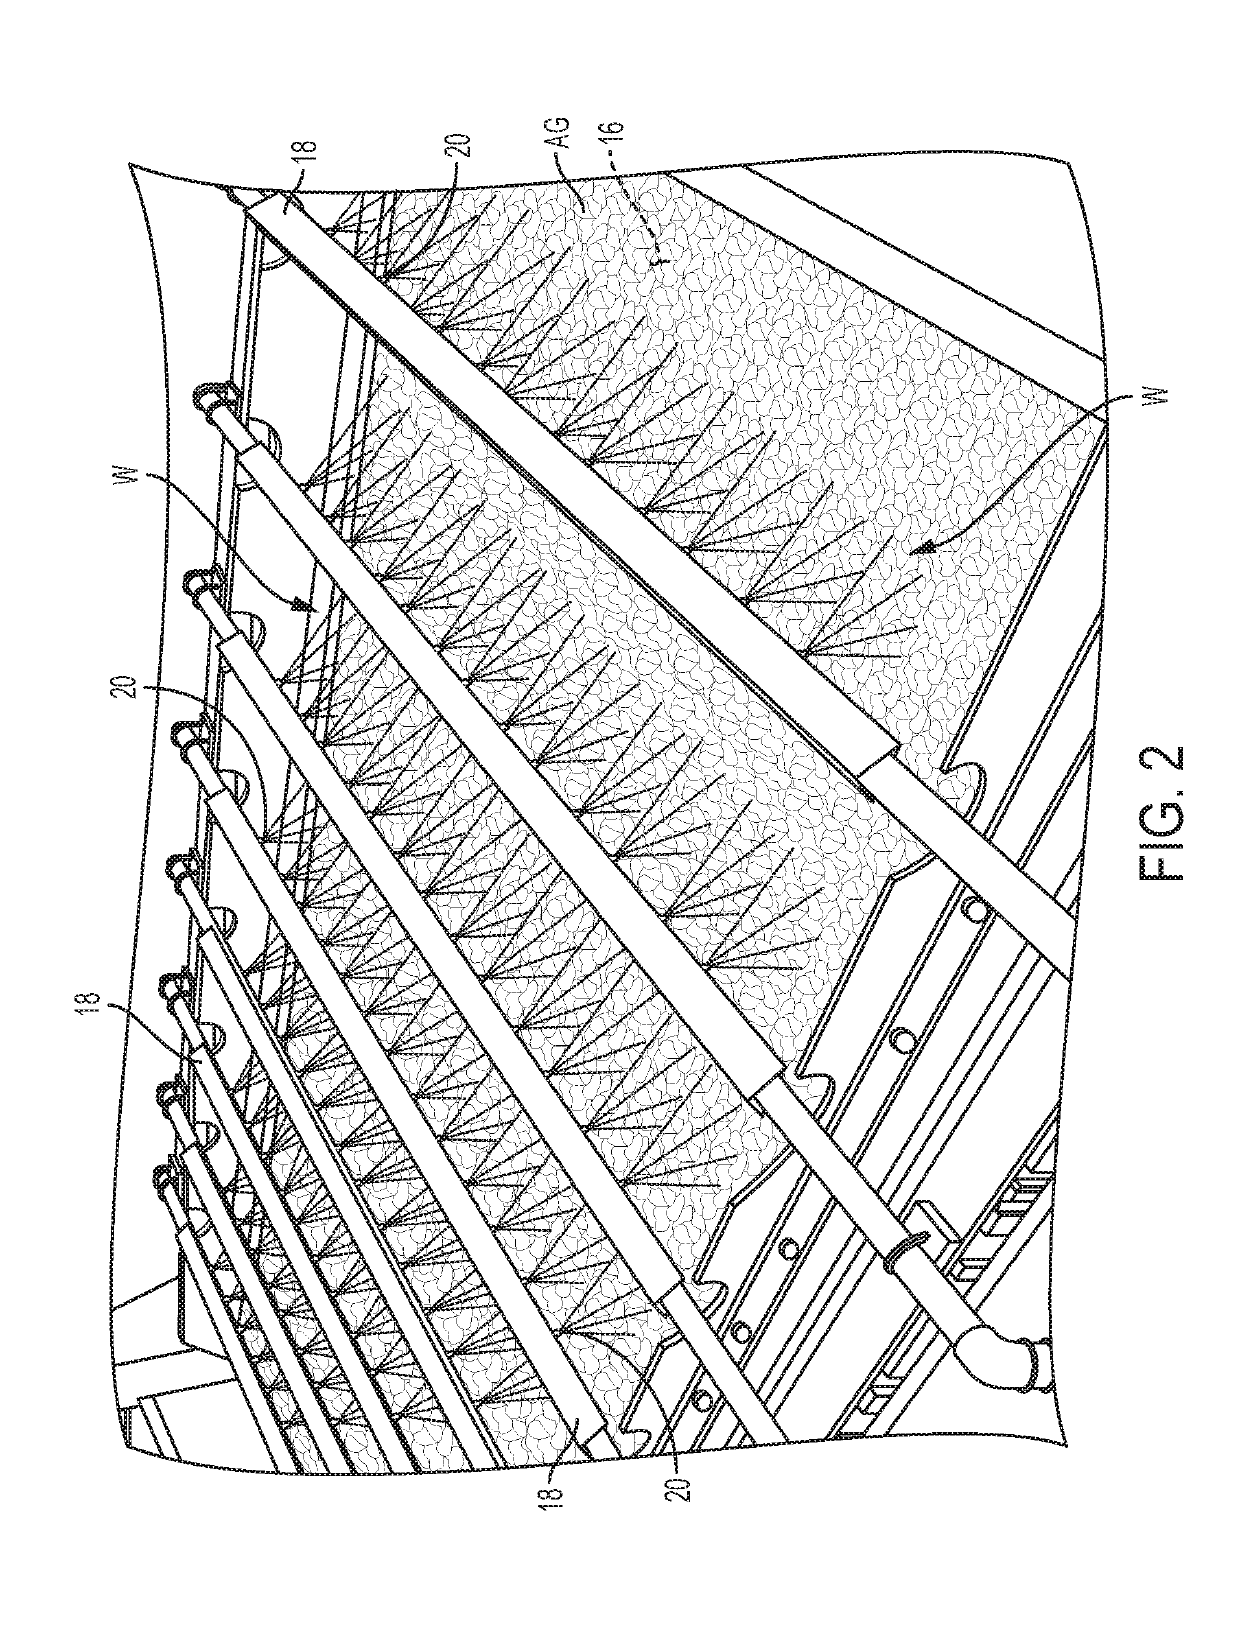 Strainer device for wash water used with equipment in the aggregate and mining industries